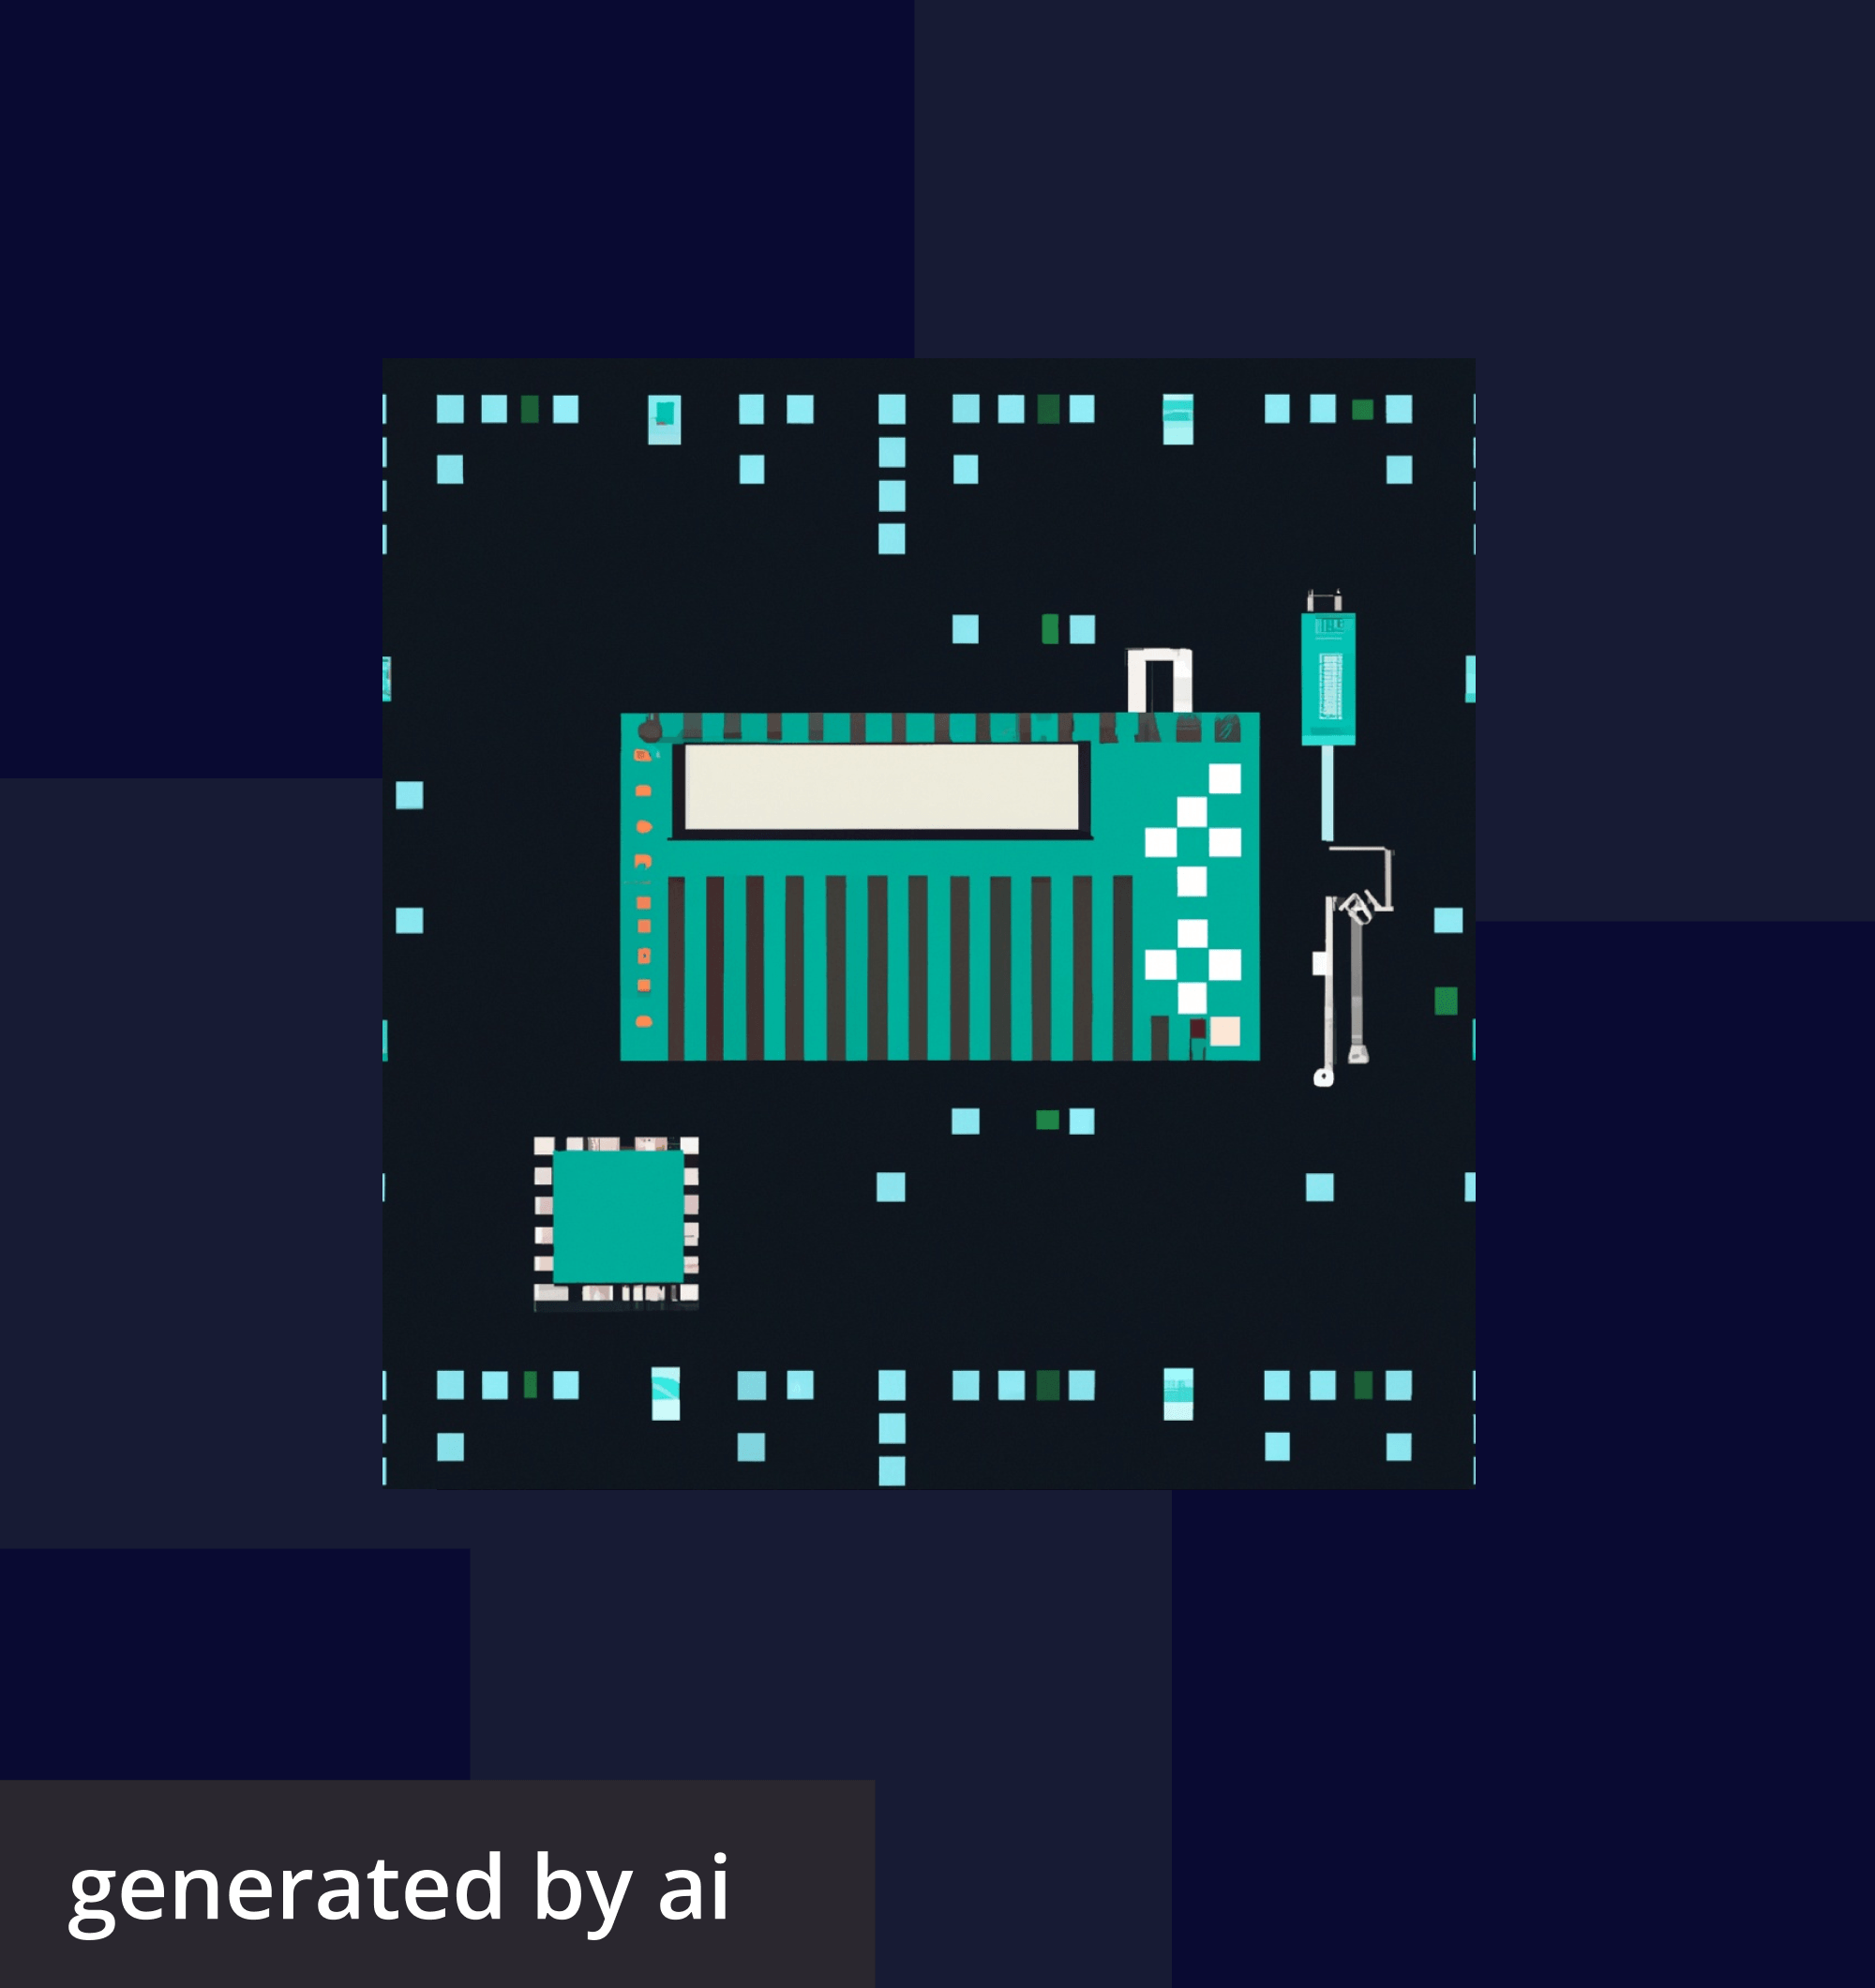 An abstract AI-generated image with a green circuit board and lines of code against a black background